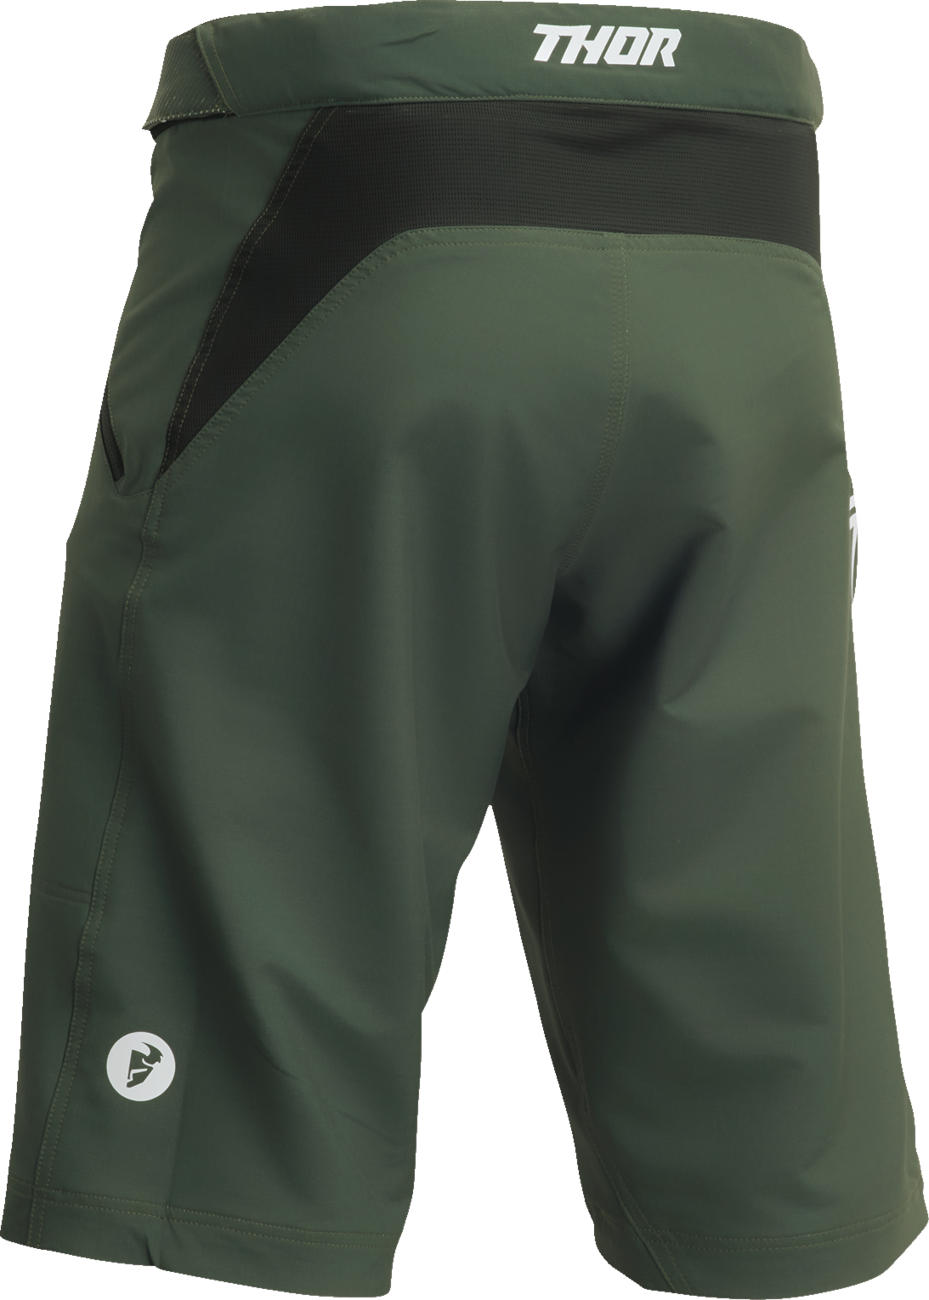 THOR Intense Shorts - Forest Green - US 30 5001-0289